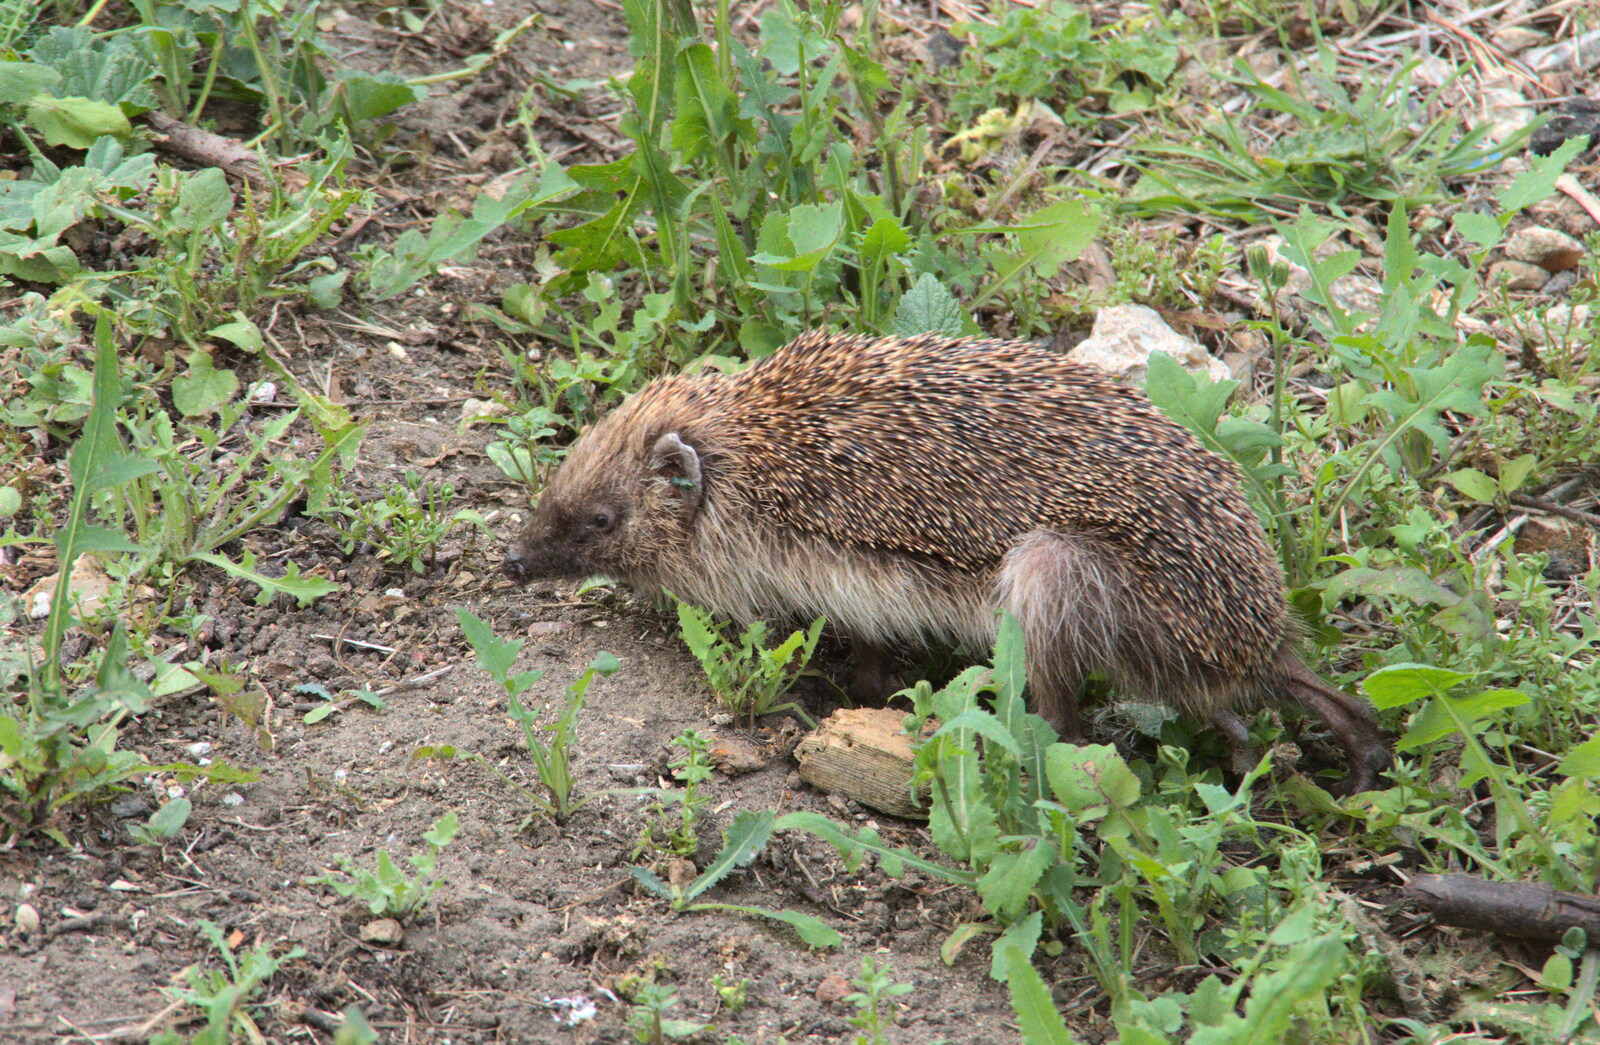 A slightly-injured hedgehog appears in the garden from Closed-Down Shops, Hedgehogs and Chamomile, Brome and Diss - 2nd August 2020